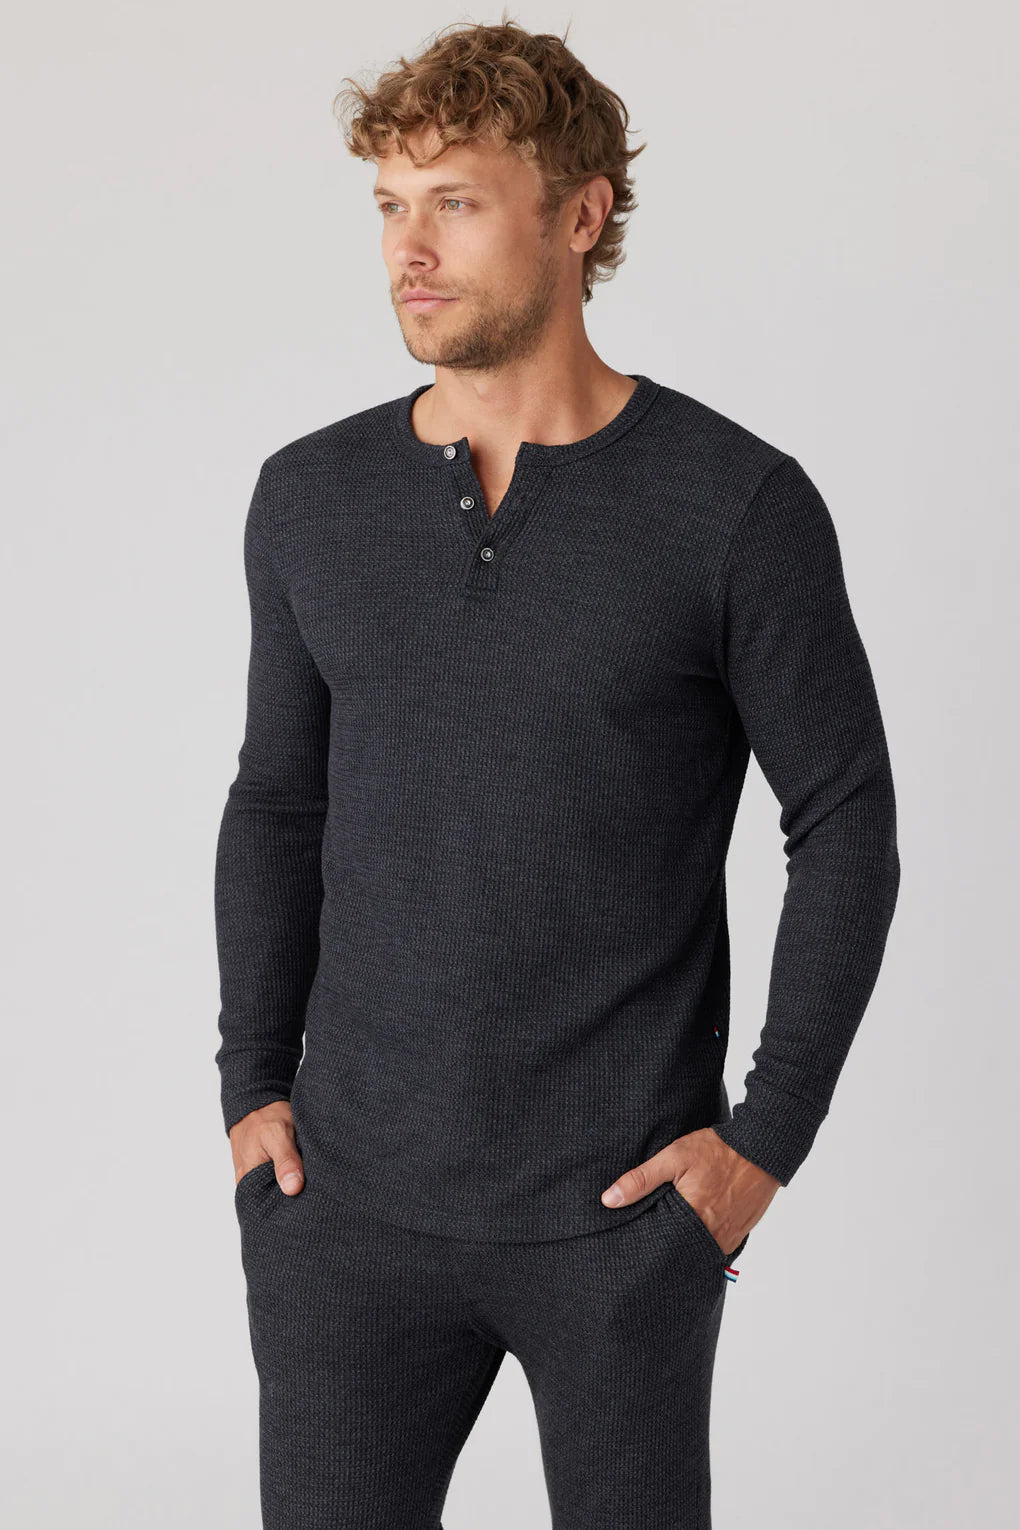 Buckle Black Thomas Thermal Henley - Men's T-Shirts in Olive Night